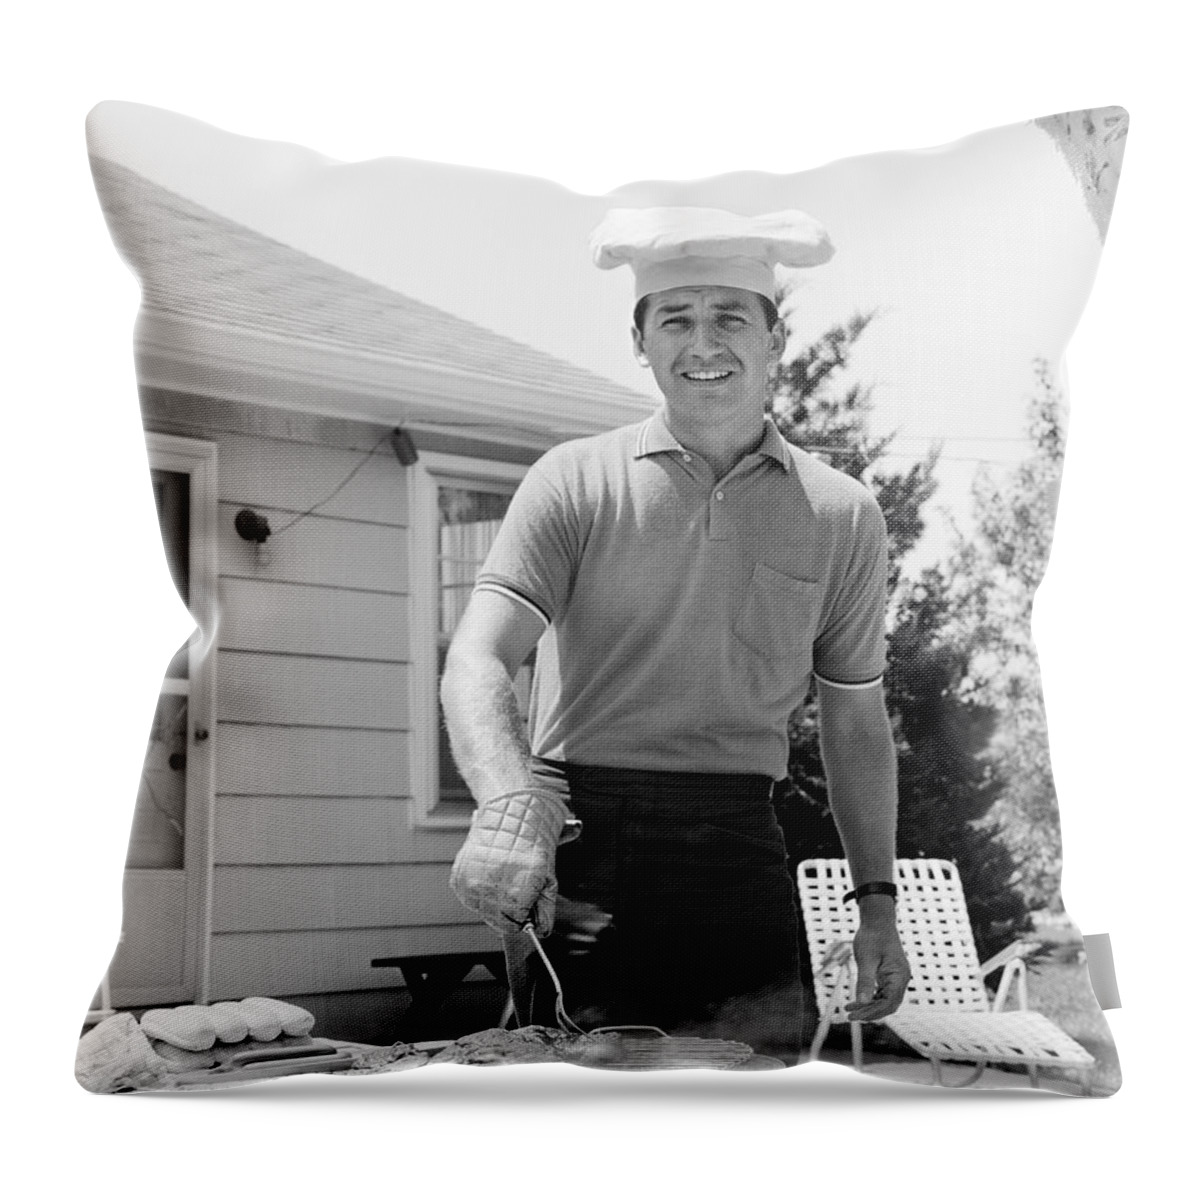 1960s Throw Pillow featuring the photograph Man Cooking Out, C.1960s by H. Armstrong Roberts/ClassicStock